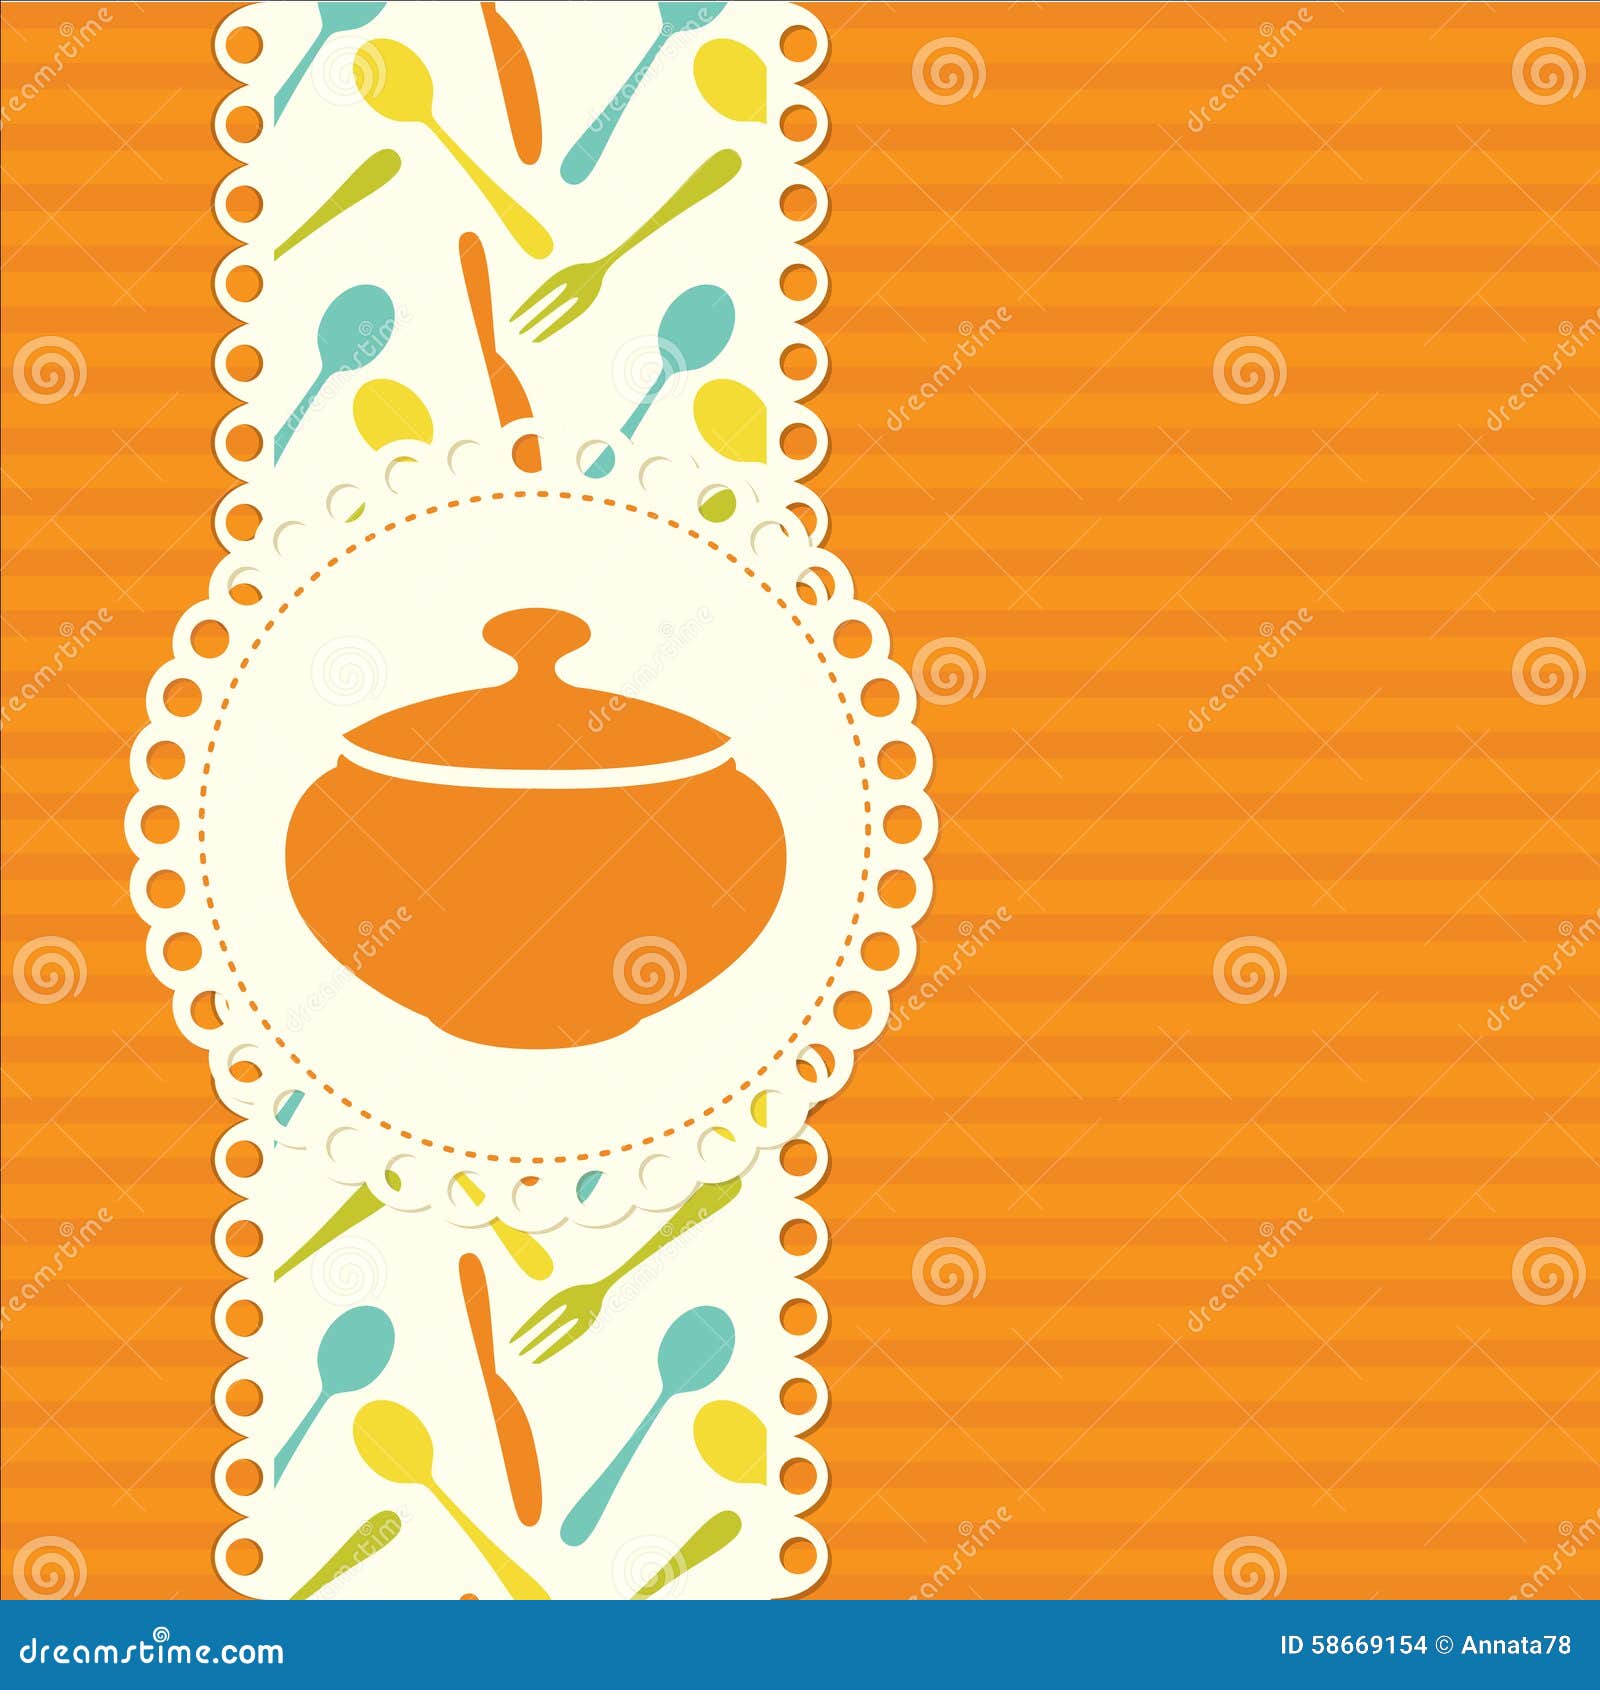 Food background stock vector. Illustration of lace, blue - 58669154